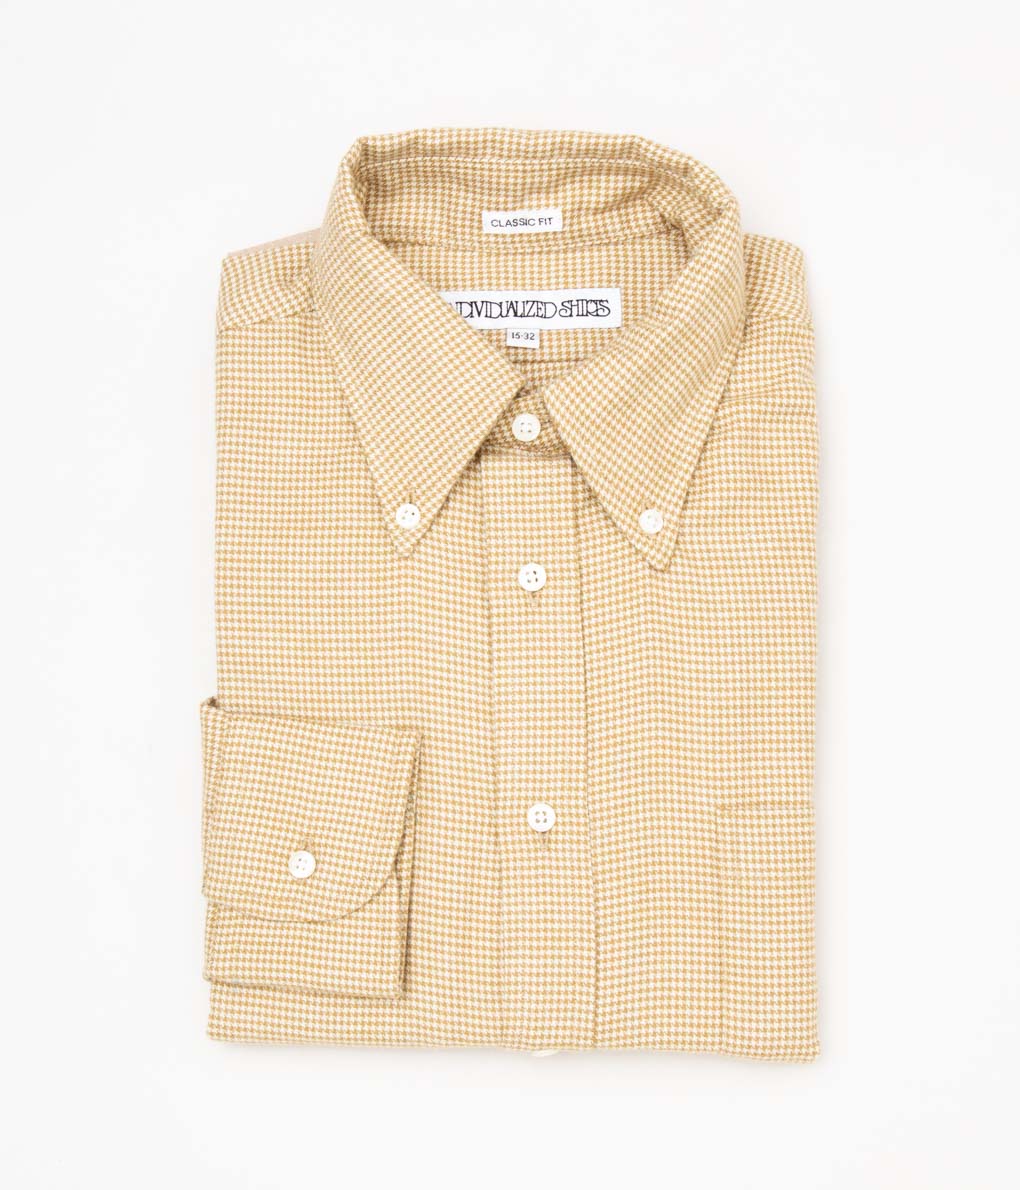 INDIVIDUALIZED SHIRTS "FLANNEL HOUNDSTOOTH (CLASSIC FIT BUTTON DOWN SHIRT)(GOLD)"